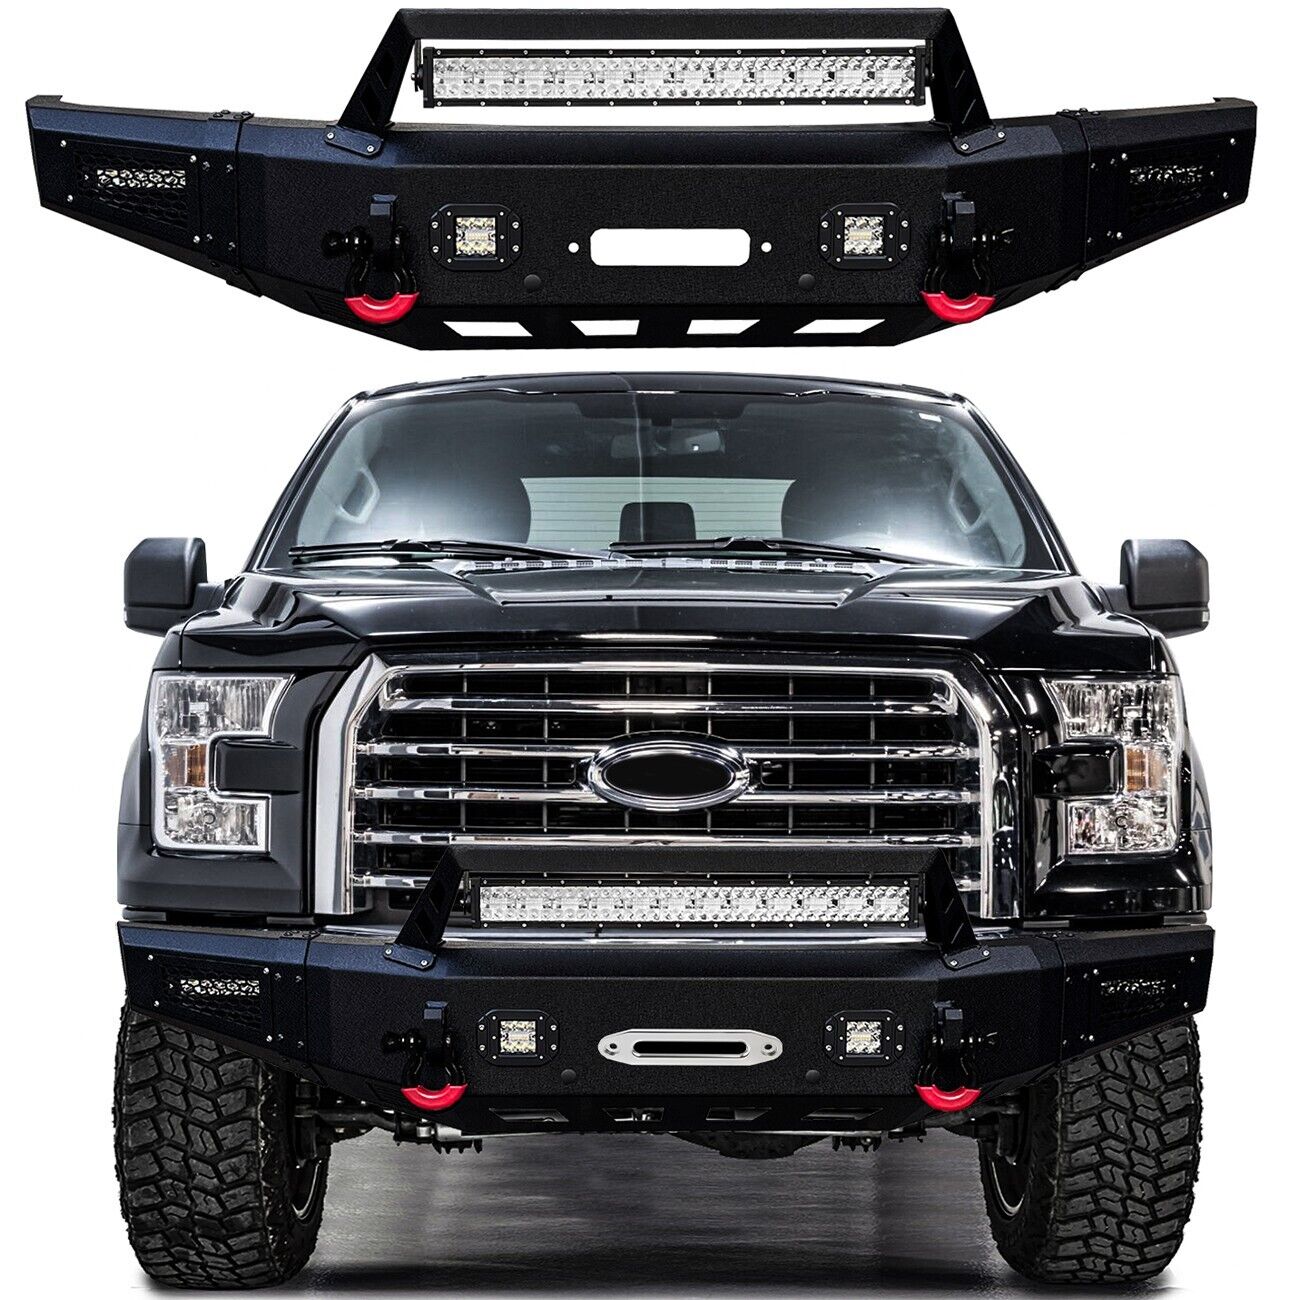 Vijay Fits Ford F150 2015-2017 New Assembly Steel Front Bumper with 5xLight